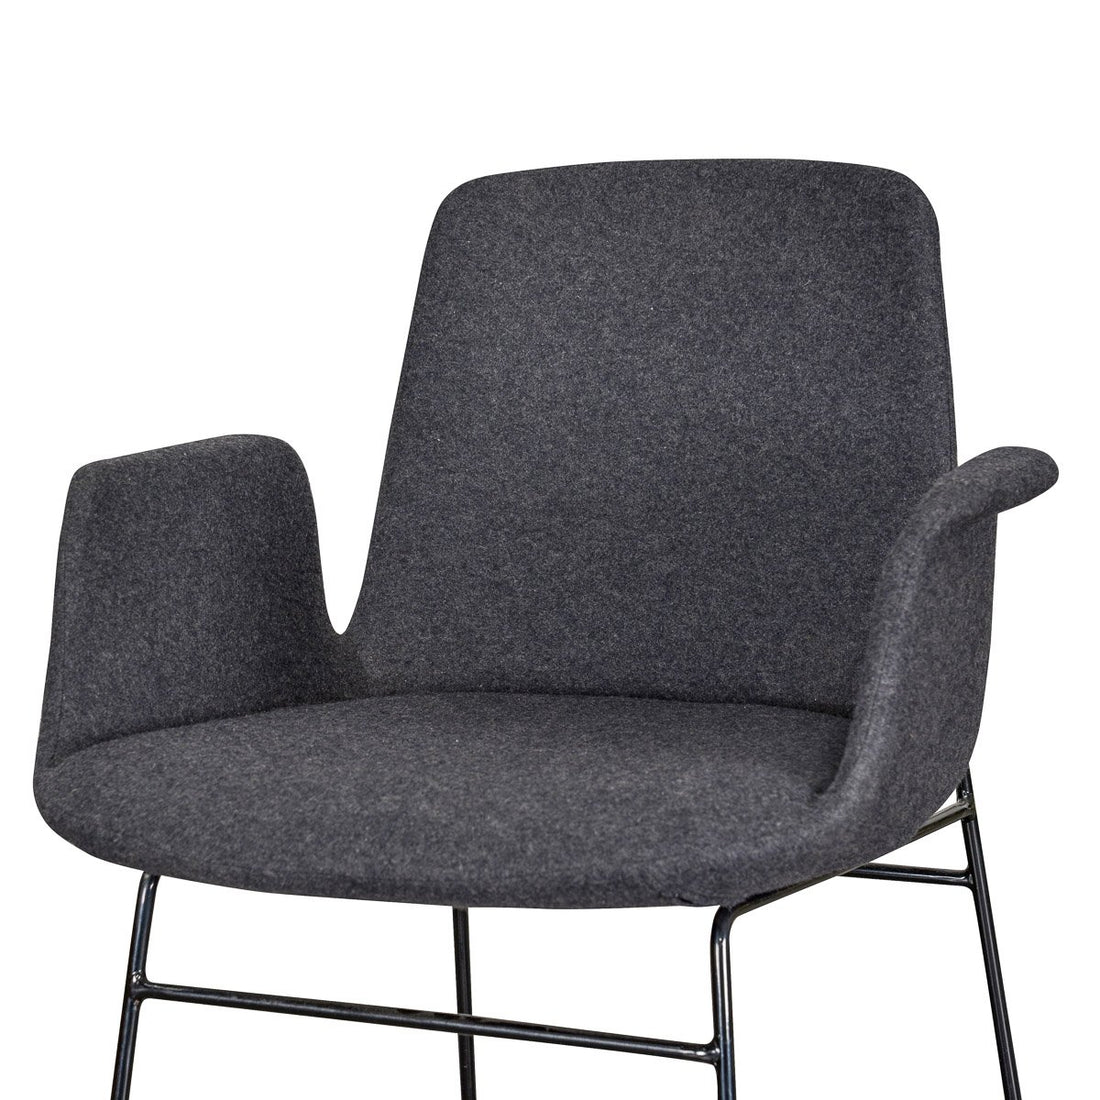 Modern dining chairs with arms